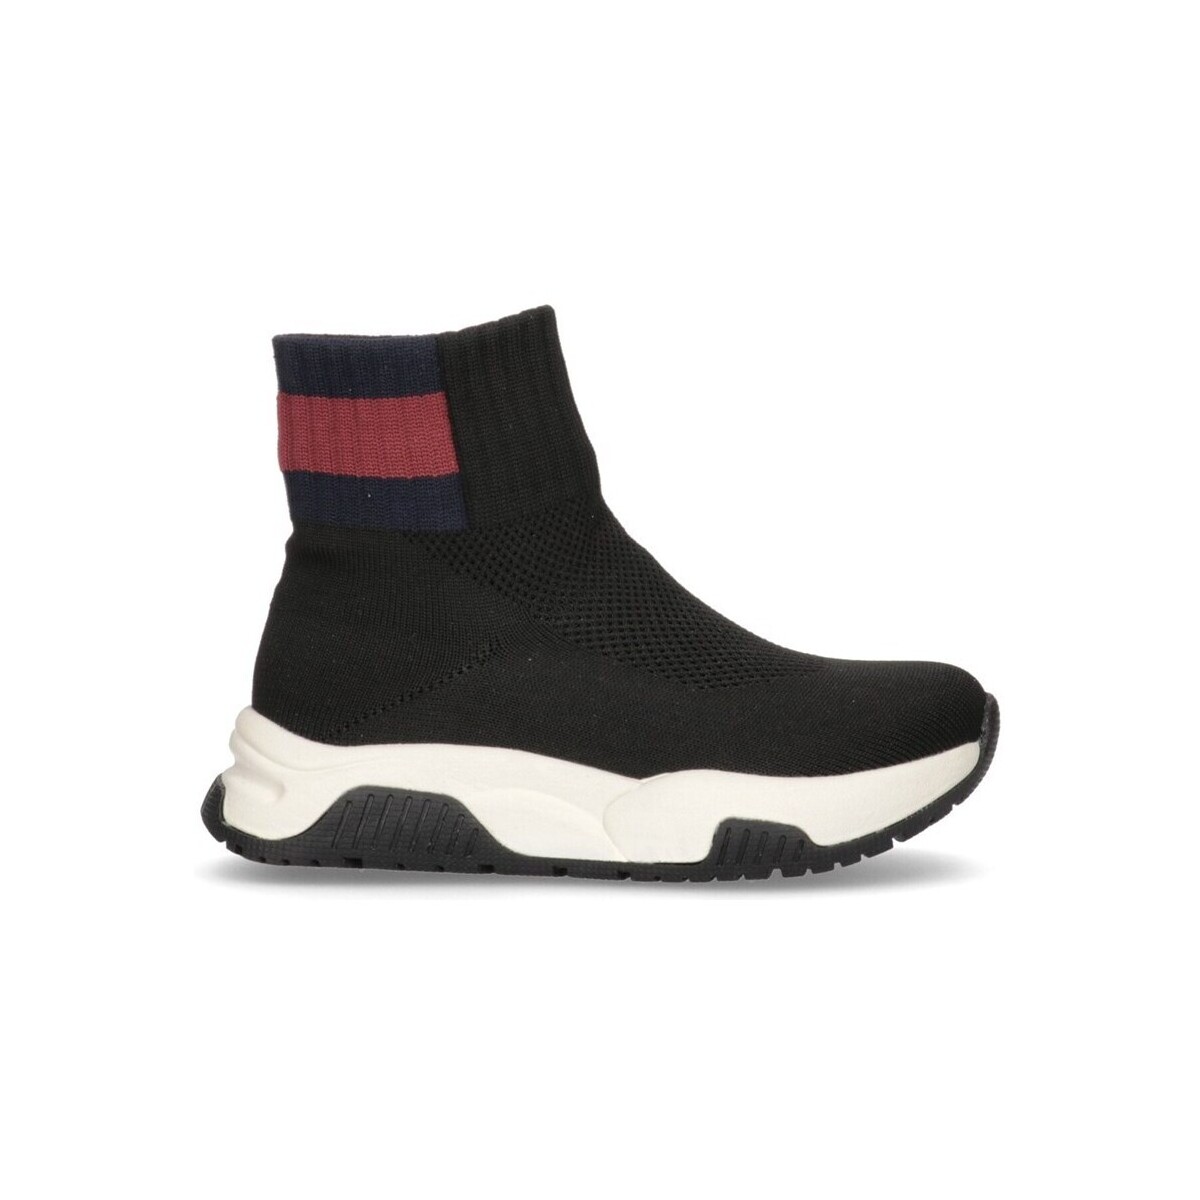 Tommy Hilfiger shoes. Shop men's and women's Tommy Hilfiger trainers.